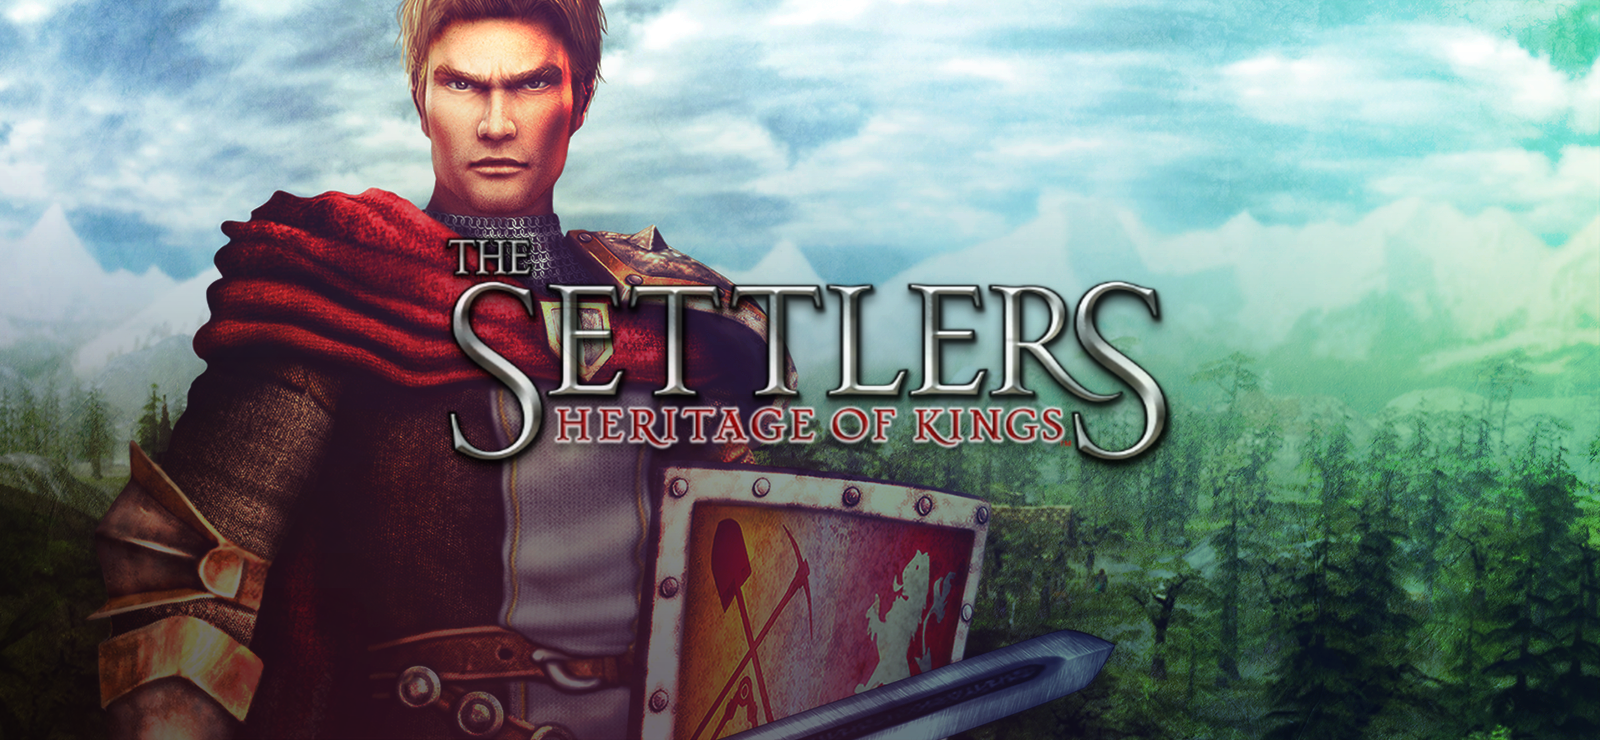 Heritage Of Kings: The Settlers™